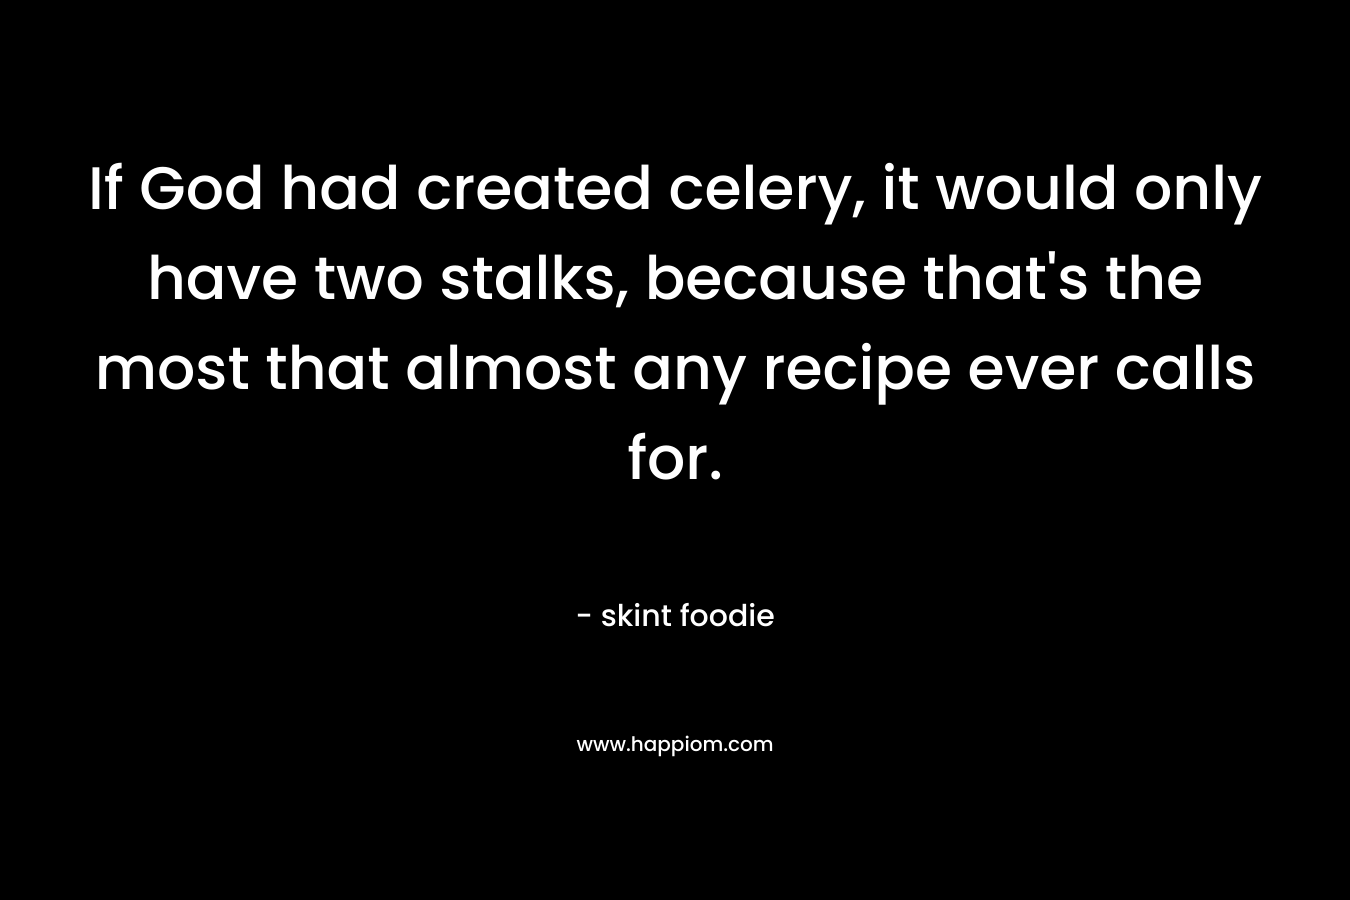 If God had created celery, it would only have two stalks, because that’s the most that almost any recipe ever calls for. – skint foodie